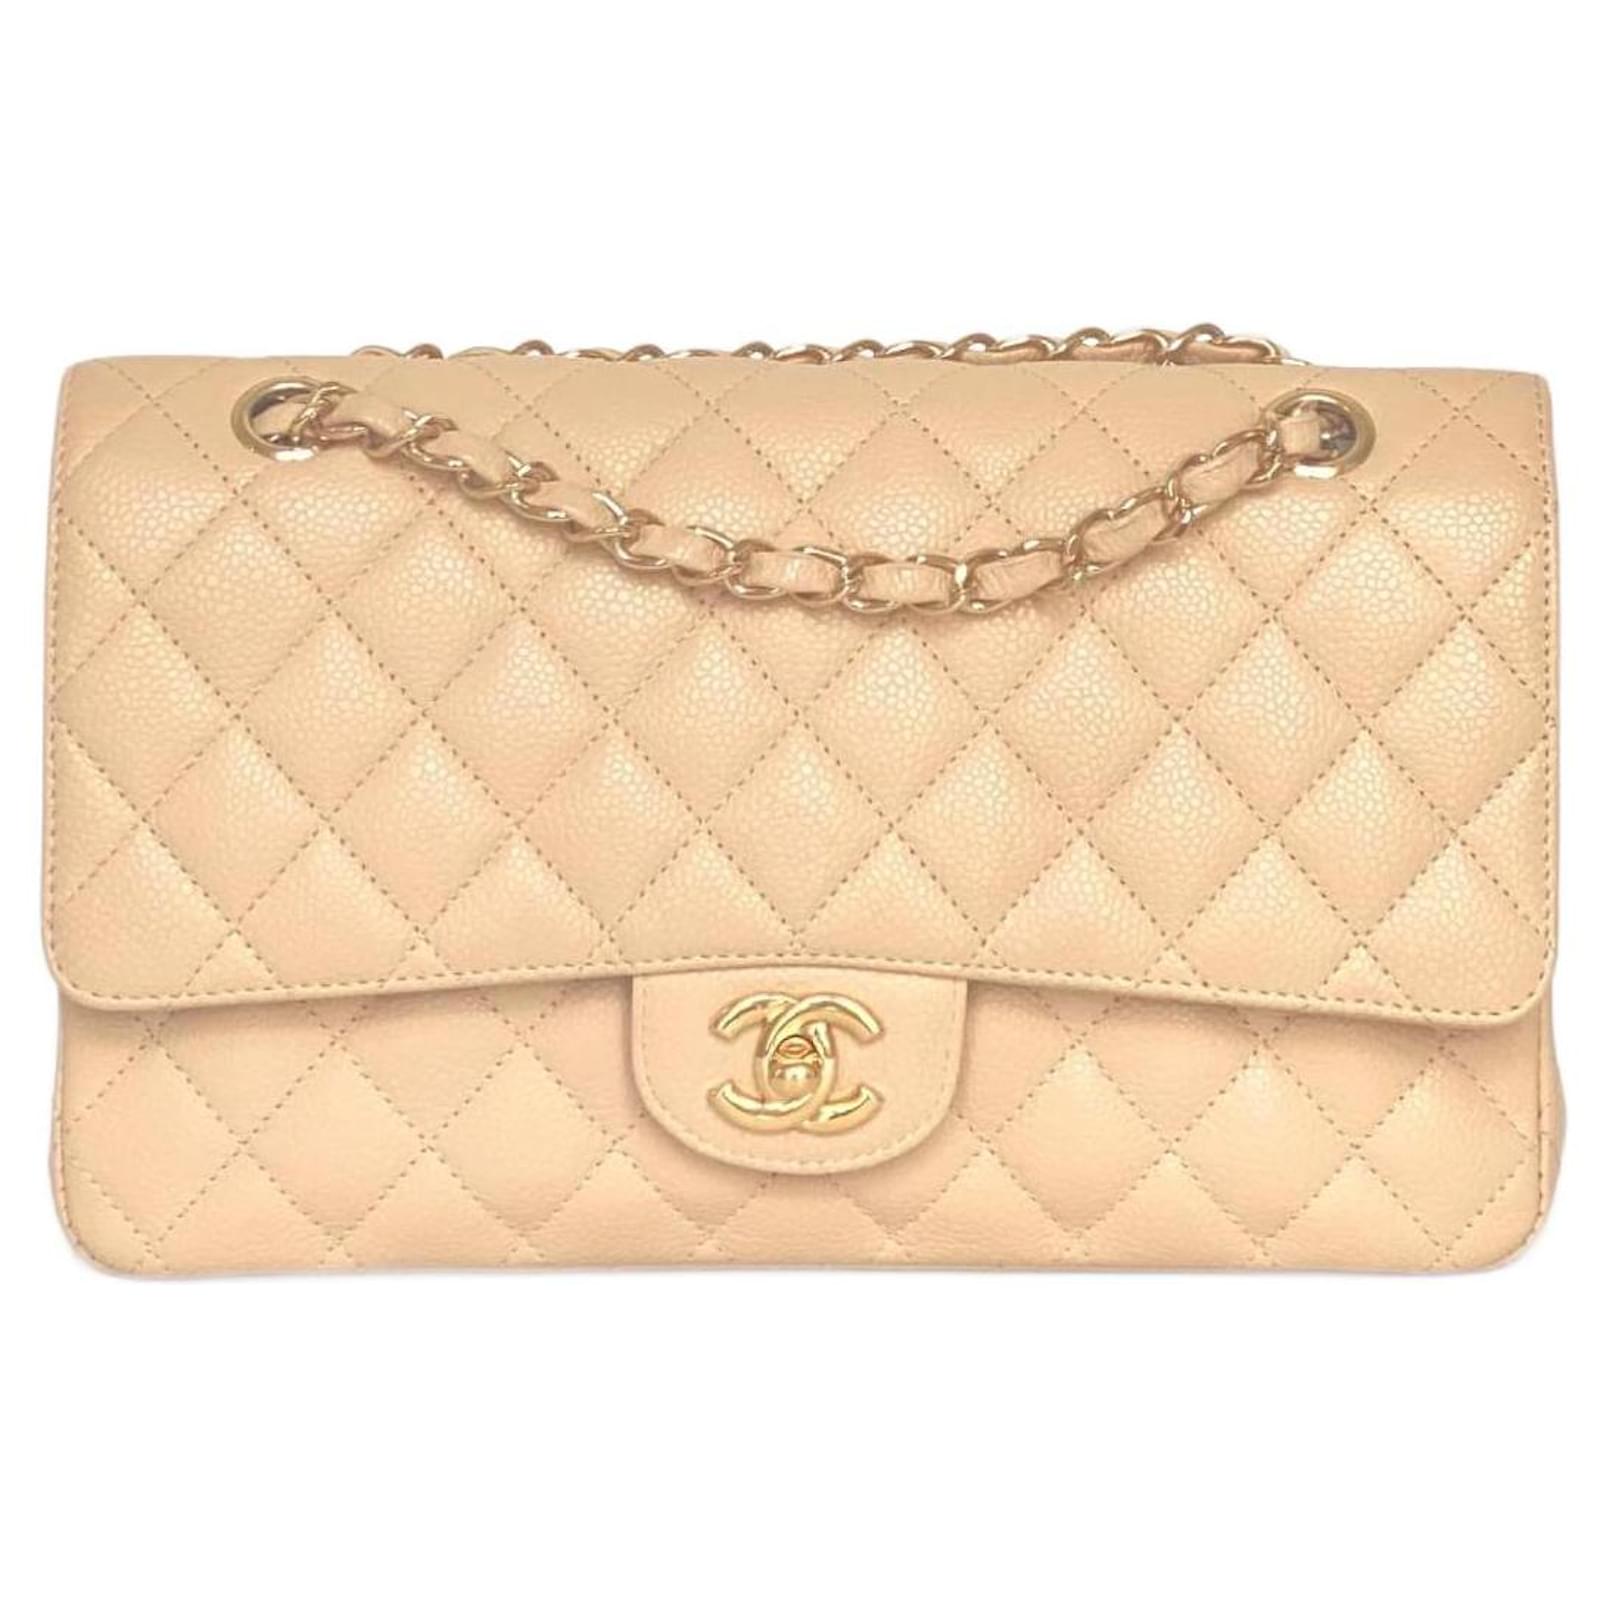 CHANEL Calfskin Quilted Maxi Pearls Card Holder Flap With Chain Light Blue, FASHIONPHILE